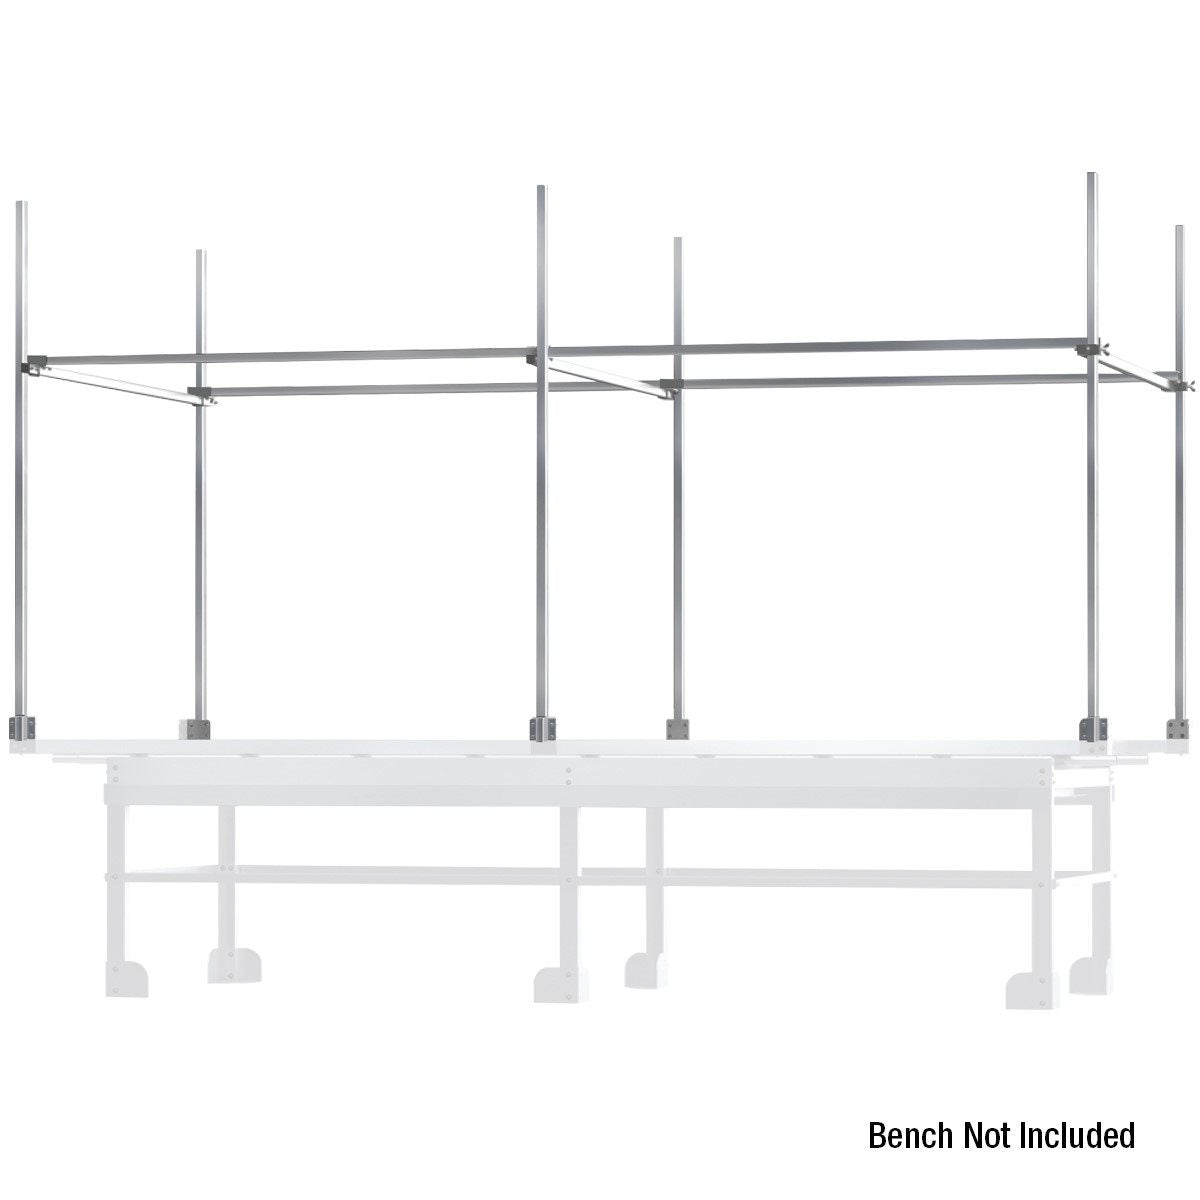 Product Image:Trellis Netting Support System 5' x 10' for XTrays Bench